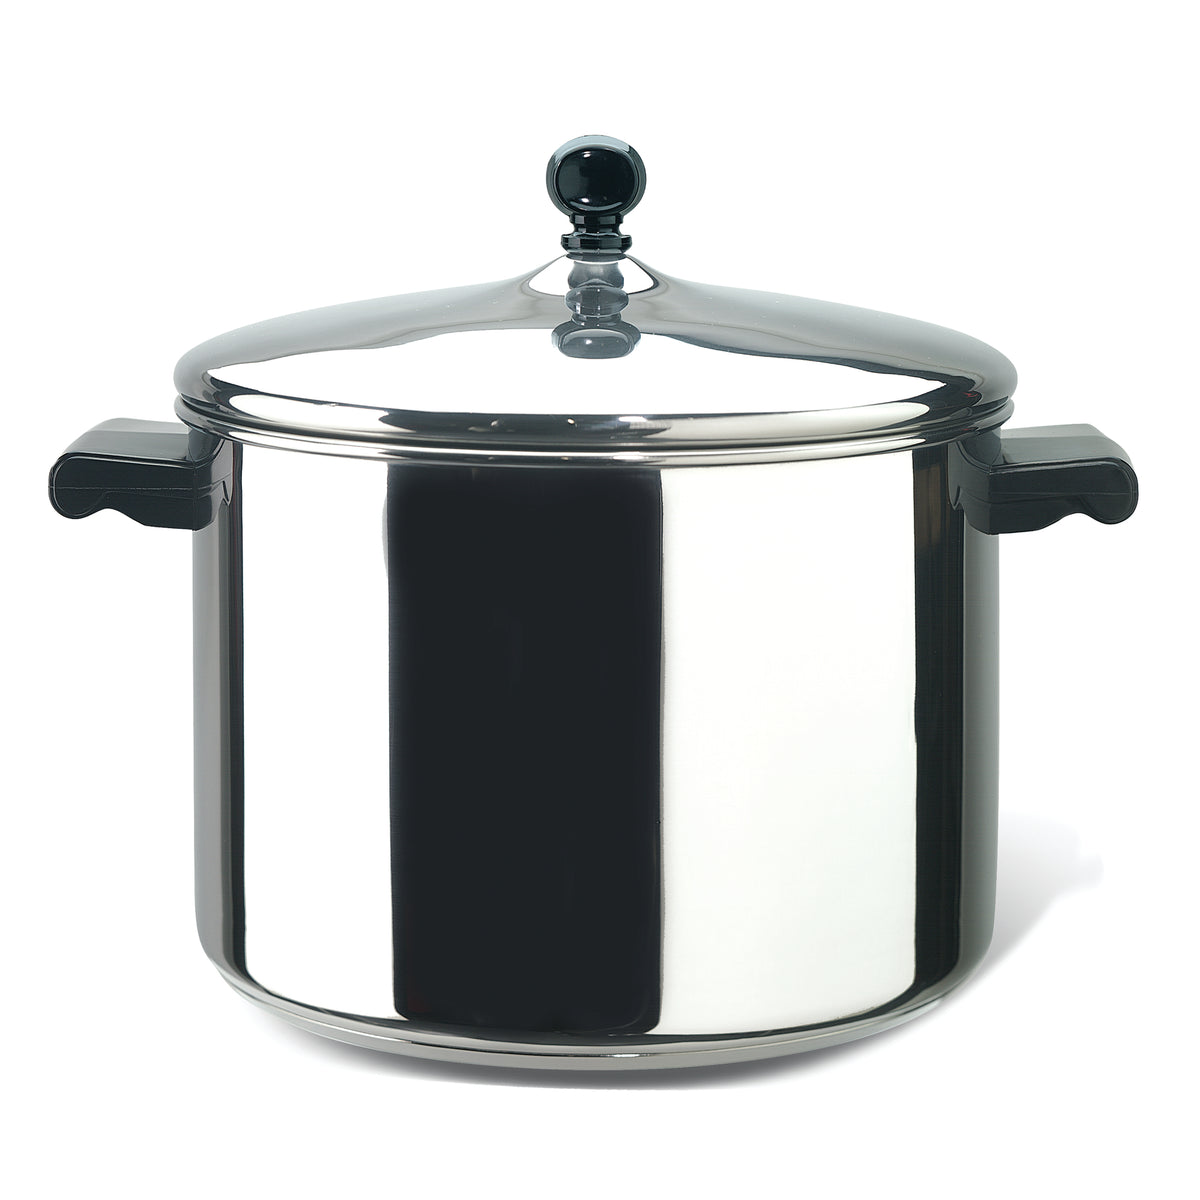 Farberware Classic Series 6qt Stainless Steel Stockpot with Lid SIlver